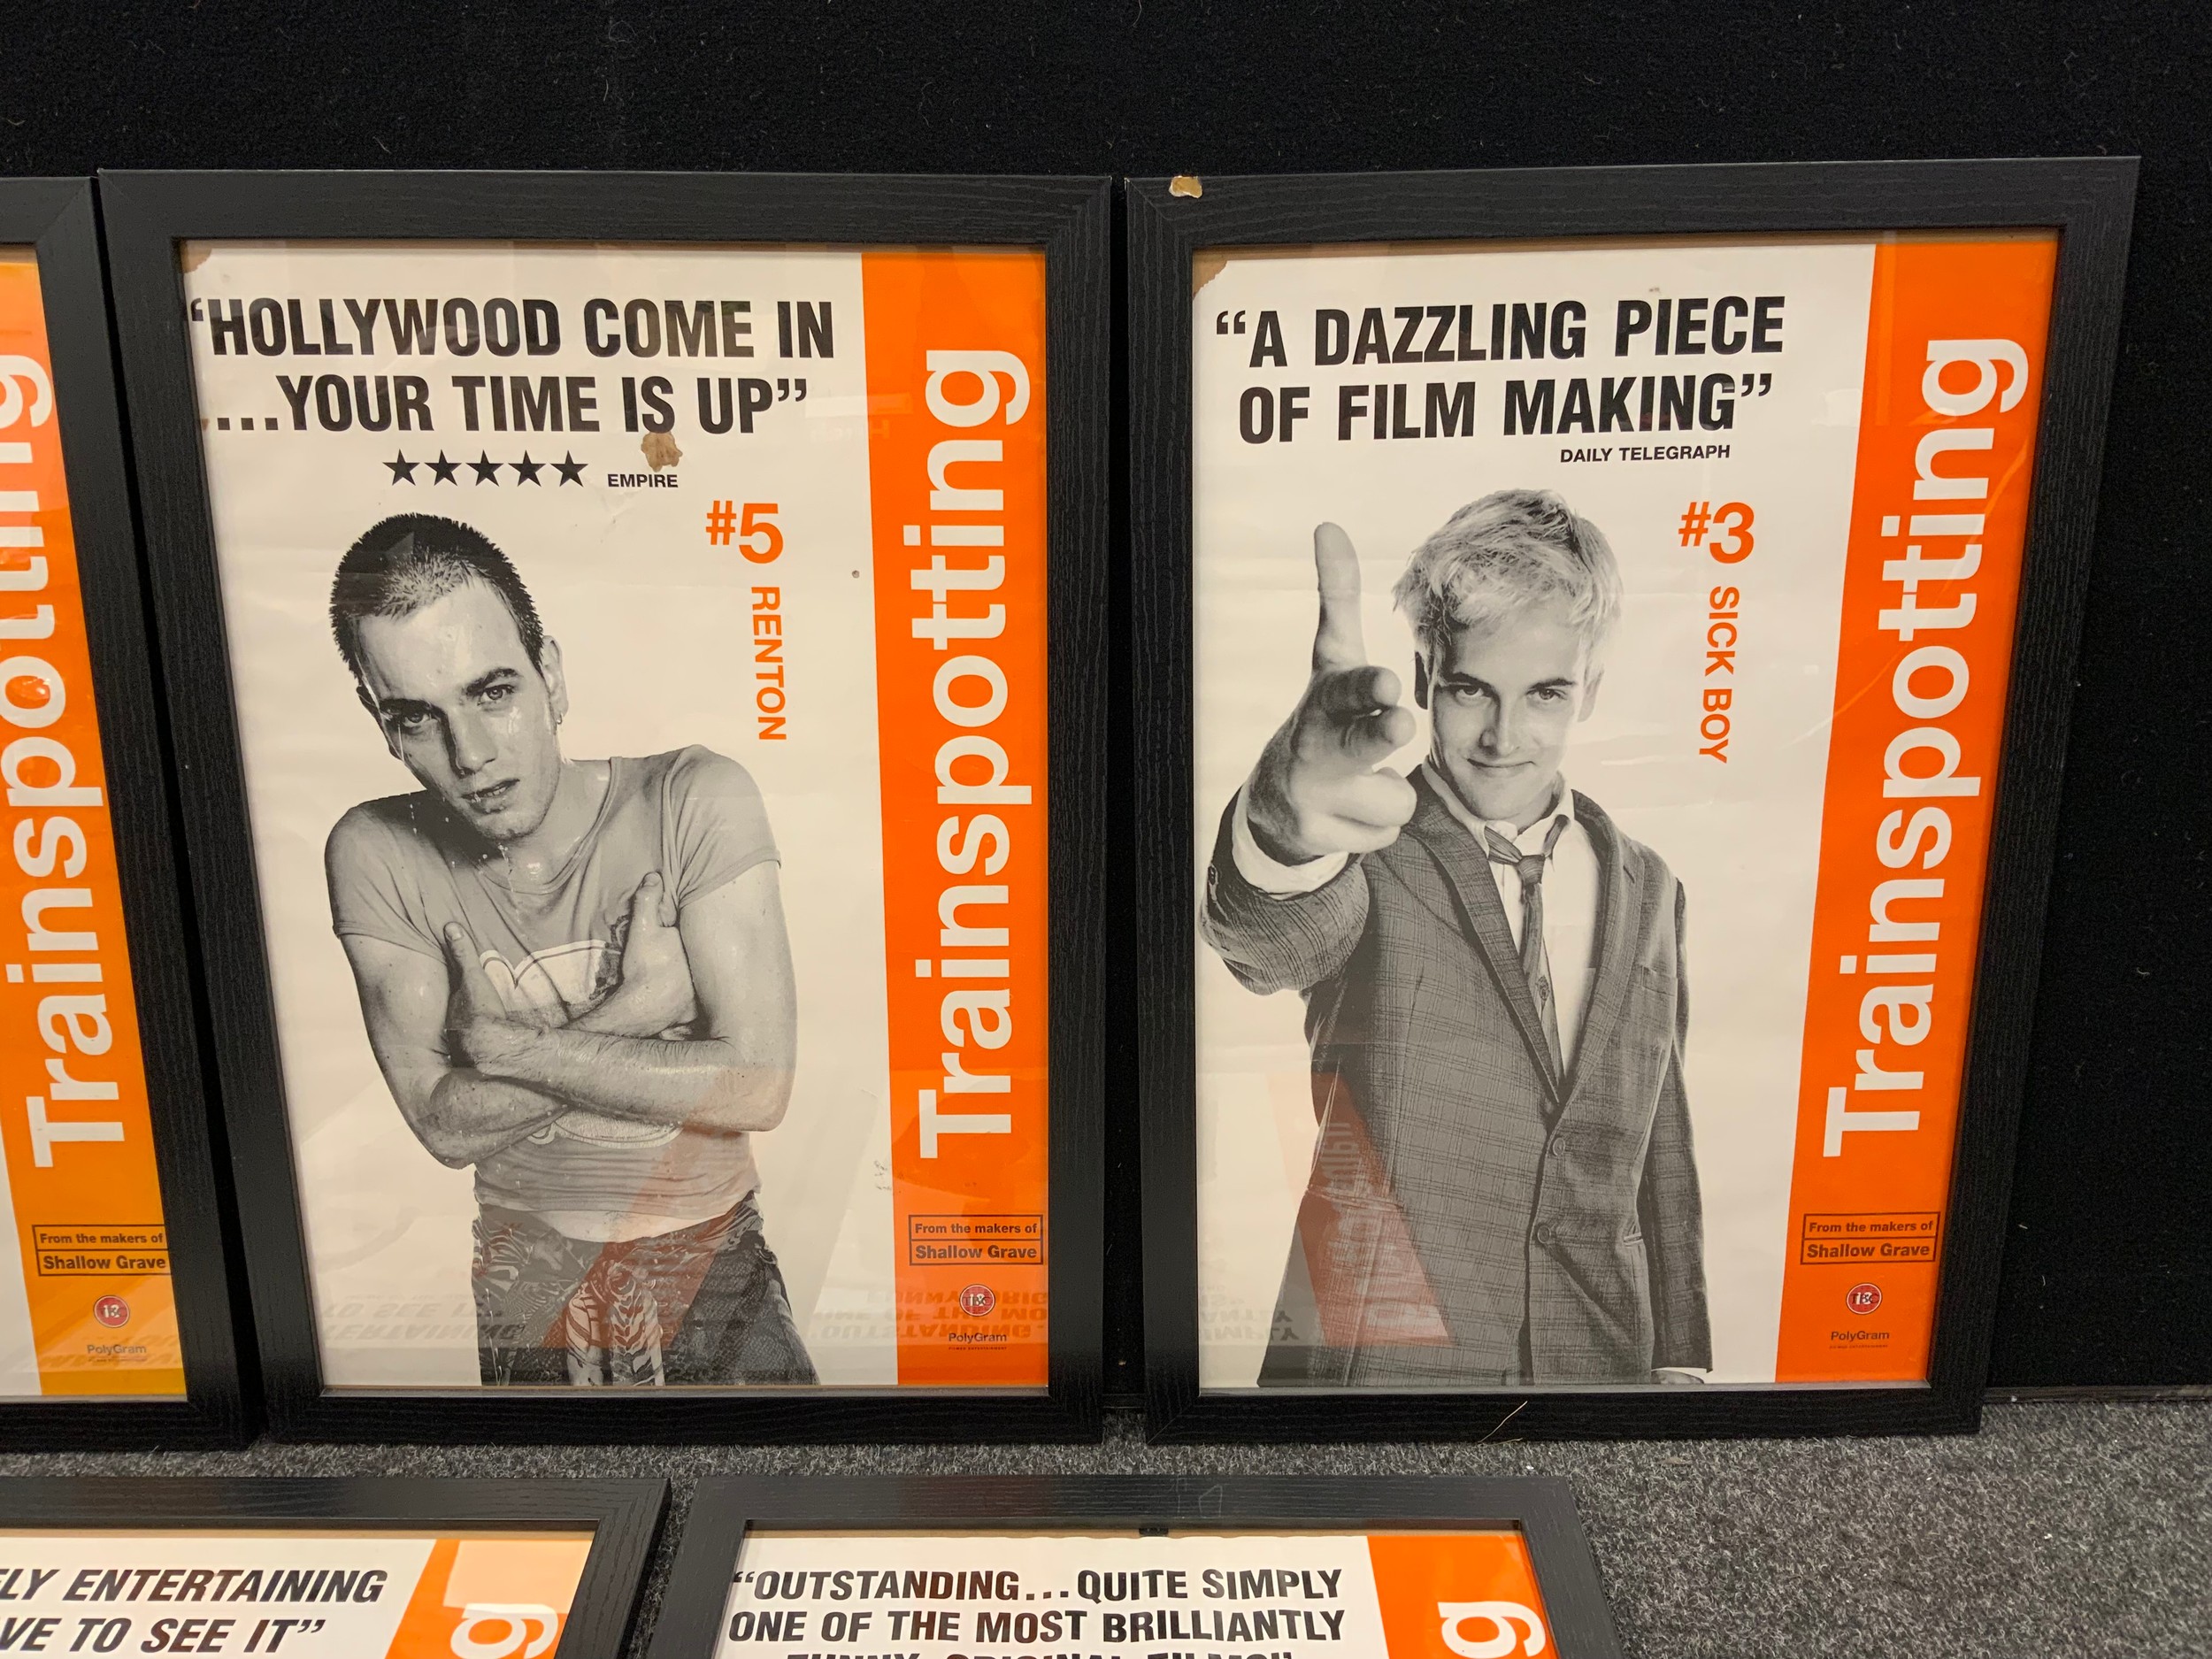 Trainspotting - set of five characters Cinema Lobby posters, Begbie, Diane, Spud, Sick Boy, and - Image 3 of 4